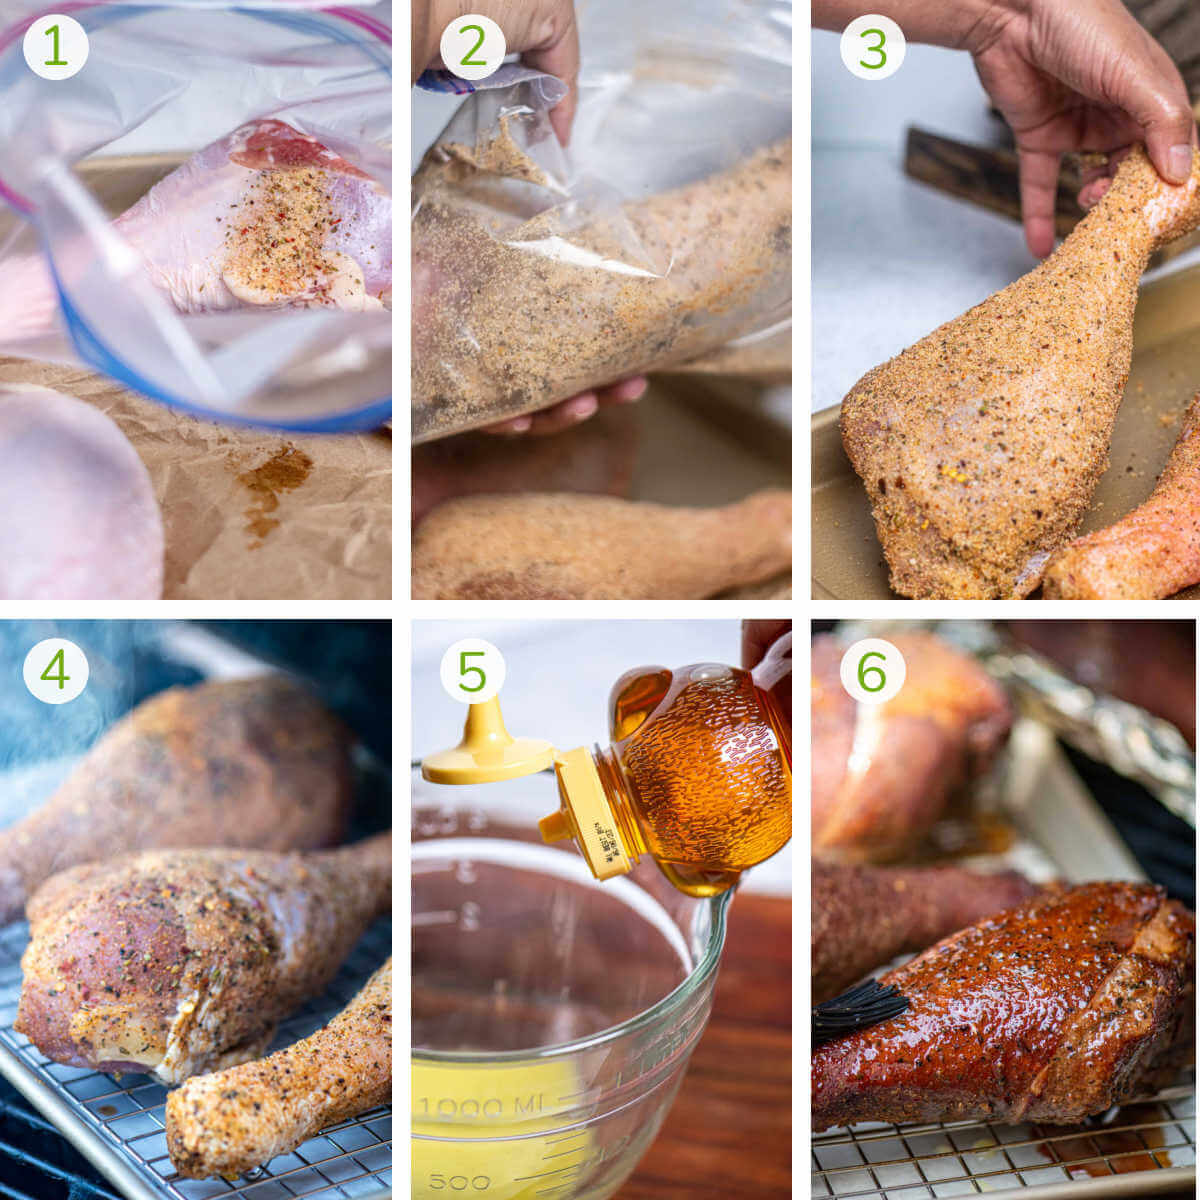 step by step photos showing adding the fry brine, letting it rest, smoking the legs and basting with a honey butter glaze.